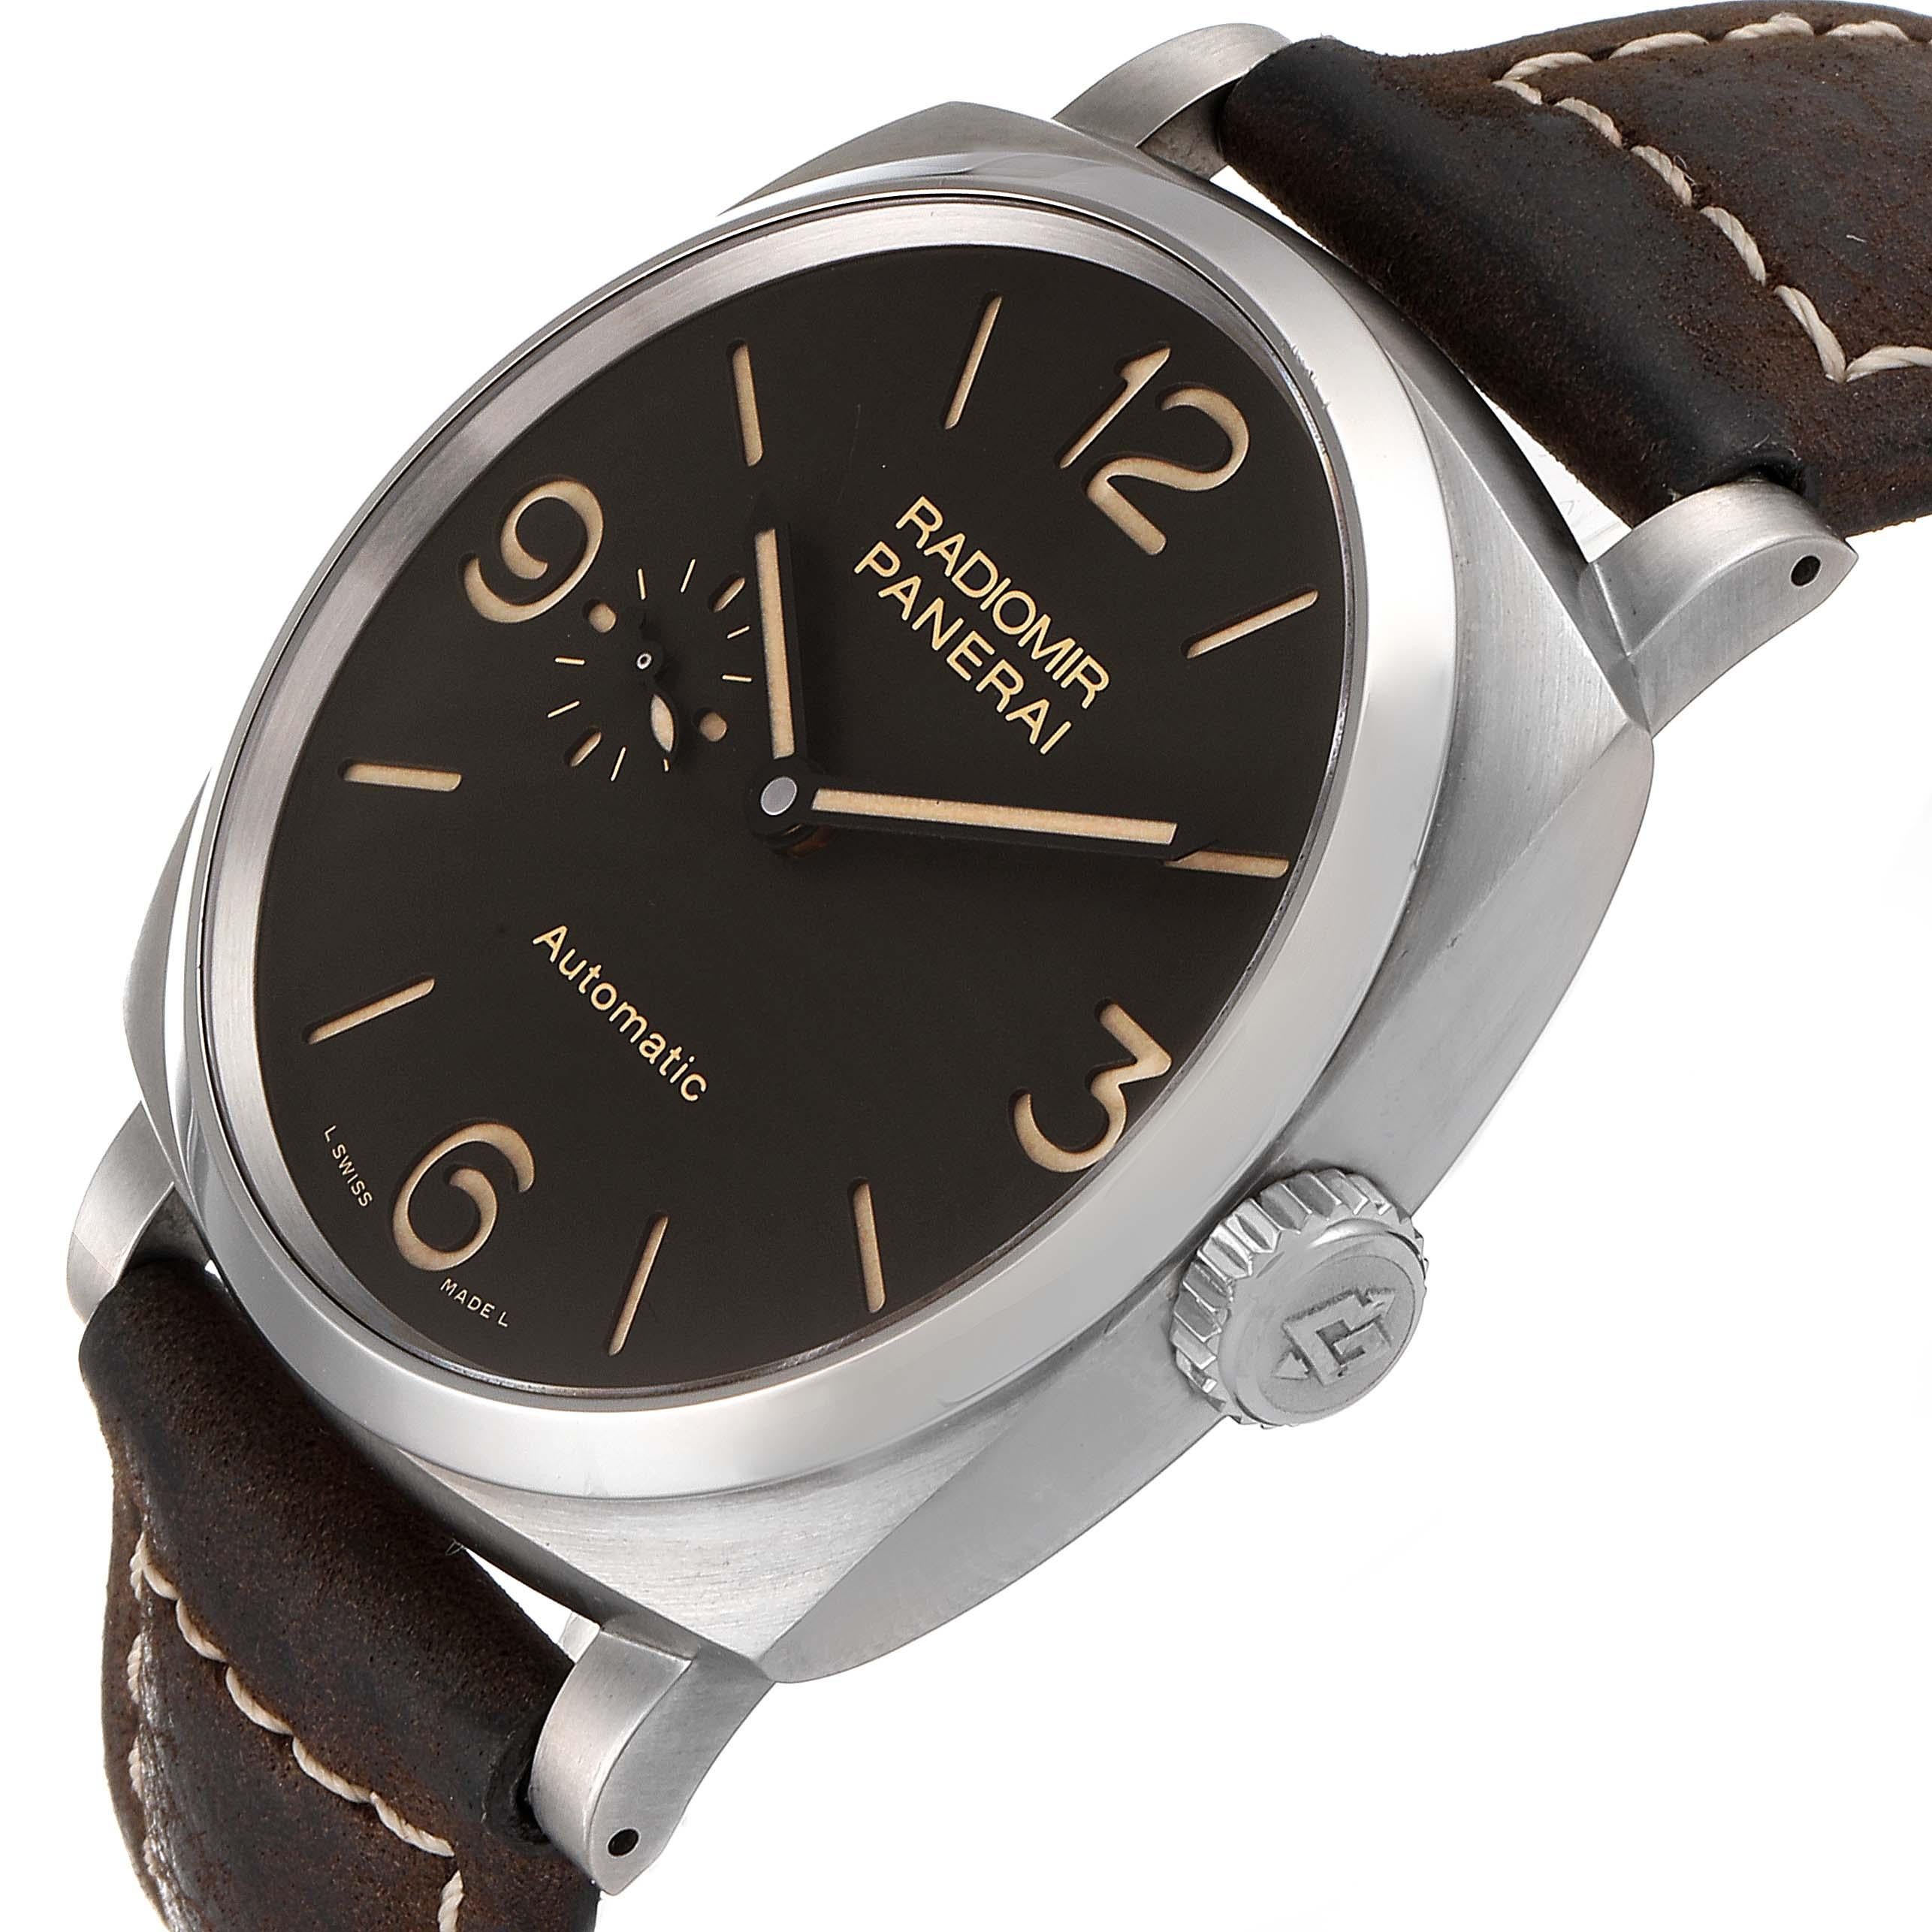 Panerai Radiomir Brown Dial 3 Days Titanium Watch PAM00619 Box Papers In Excellent Condition For Sale In Atlanta, GA